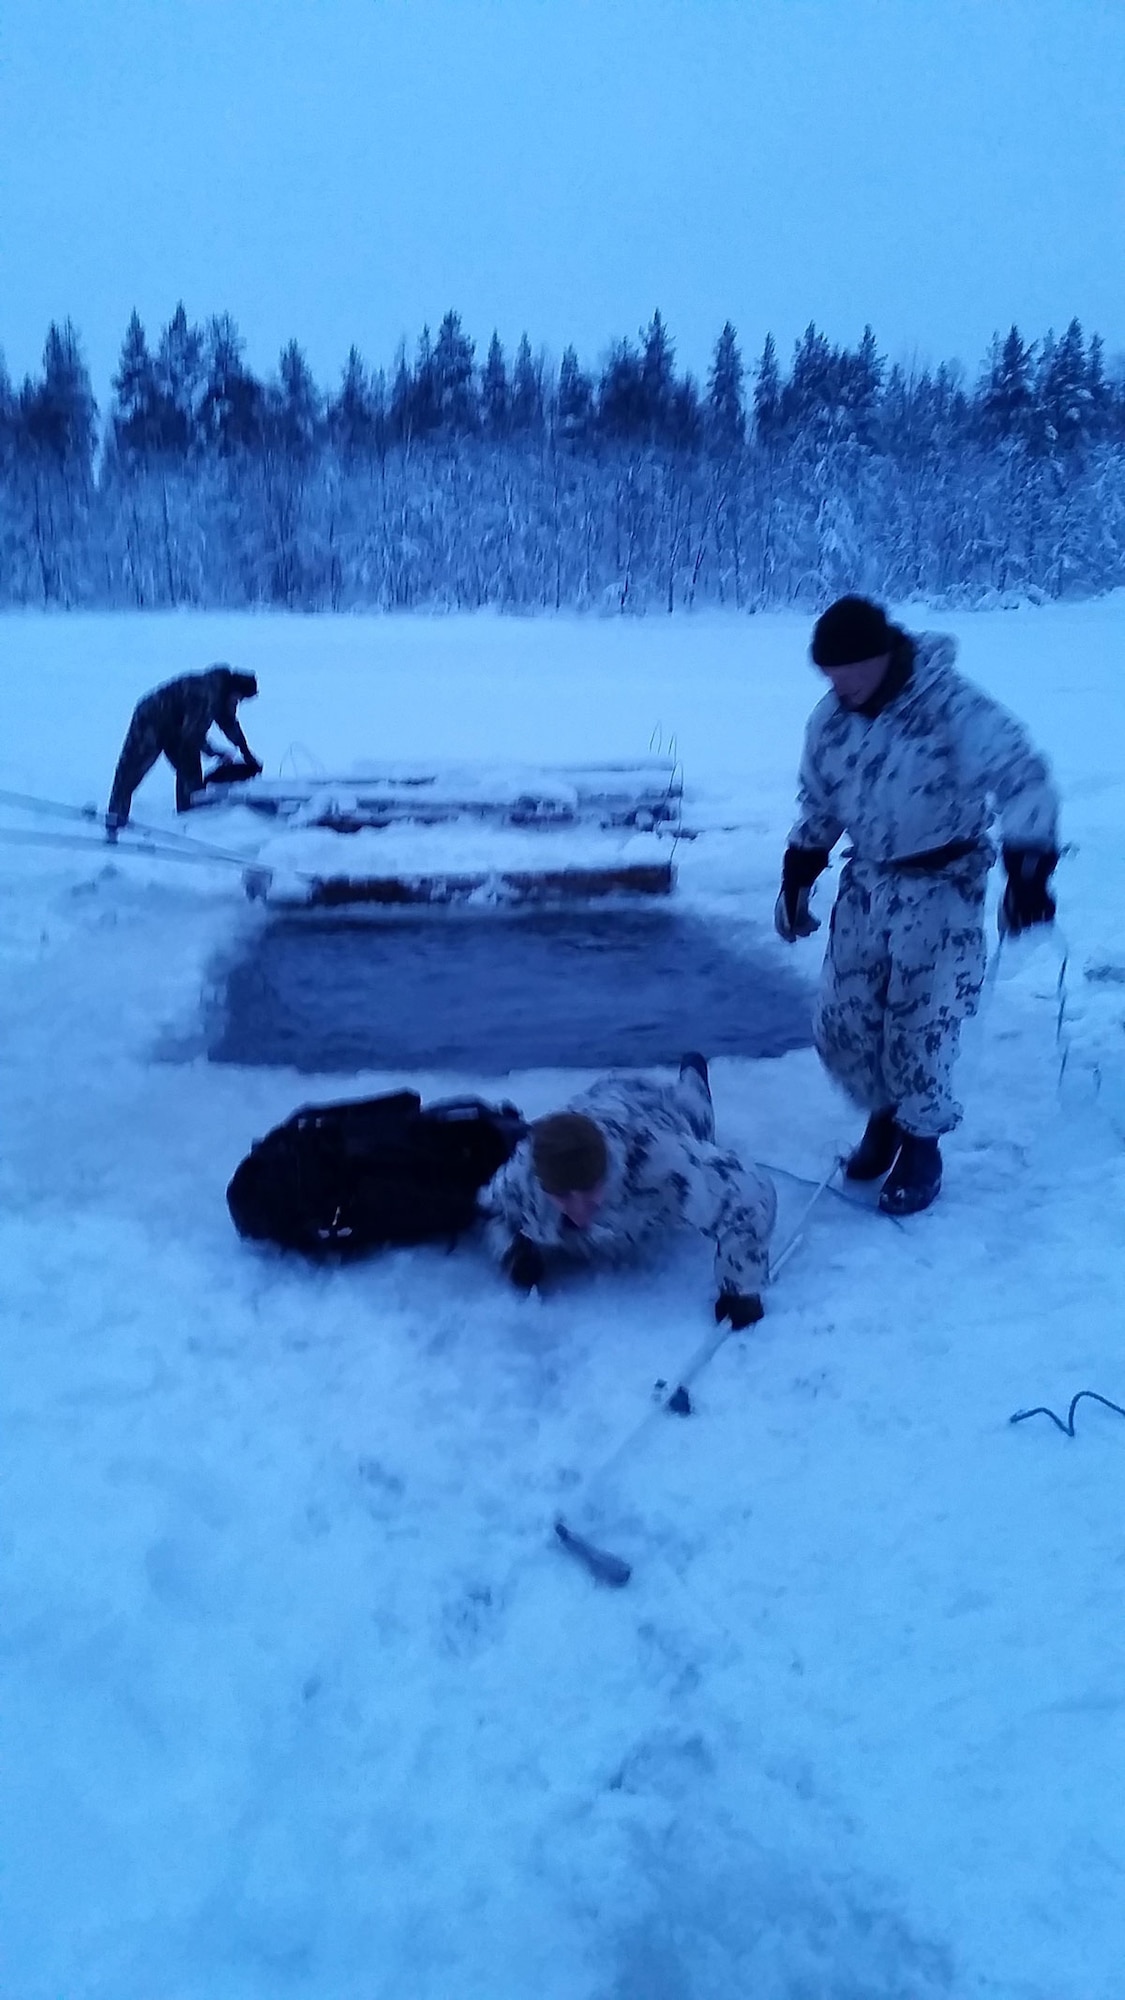 Sgt. 1st Class Cory Birdsong (lower center) with 3rd Battalion (Airborne), 509th Infantry Regiment, 4th Infantry Brigade Combat Team (Airborne), 25th Infantry Division, conducts the breaking through ice drill as part of the Finland Cold Weather Basic Operation Course Jan. 6-16, 2015, to build on relations with the Finland Forces and improve knowledge of operations conducted in a cold weather environment. The 10-day course is similarly structured to the U.S. Army’s Cold Weather Leaders Course, with the exception that the entire course is on skis instead of snow shoes. Some of the basic tasks taught are moving and shooting with skis, building a fire using a survival kit, ski course to learn how to brake going downhill and a ski obstacle course, land navigation with ruck sack and skis, crossing a river with skis and breaking-through-ice drill with skis while wearing a ruck sack. (U.S. Army courtesy photo/Released)